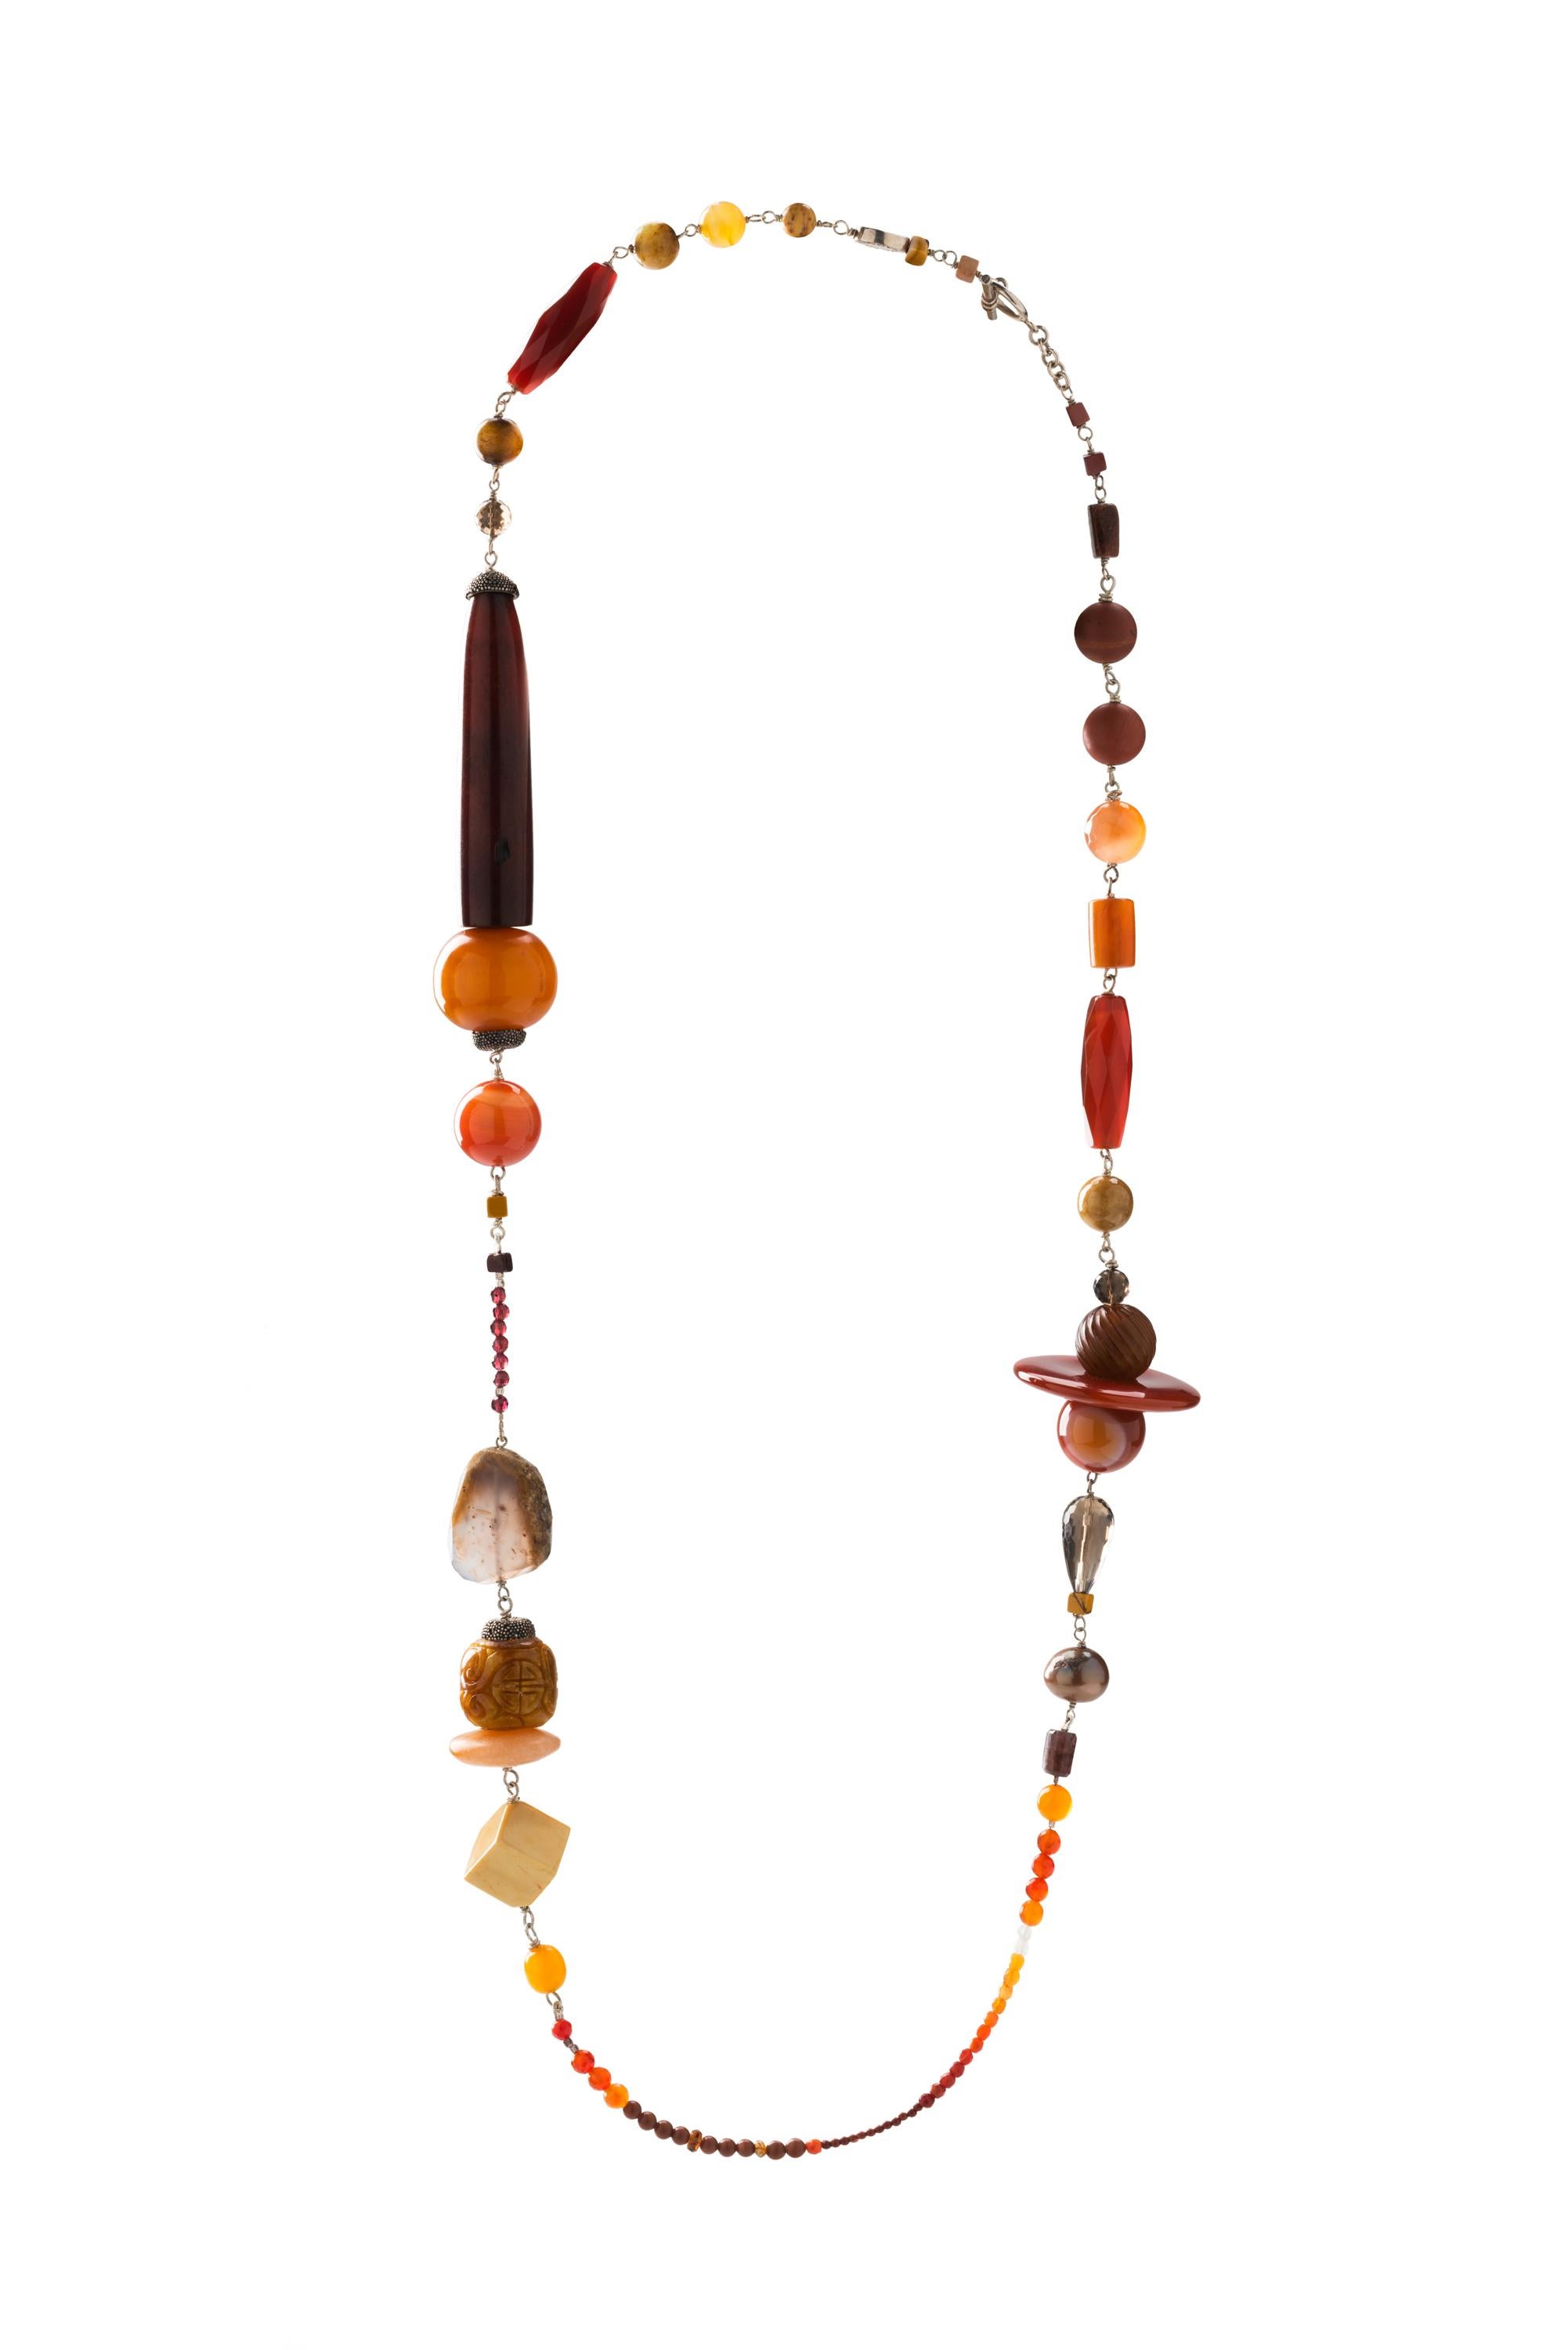 International award-winning Jewelry Design and Academic Dr. Jane Magon's created this necklace called SETTING SUN ON ULARU with the main stones being Carnelian, Agate, Mexican Fire opal. The inspiration is the Setting Sun on Ularu refers to Jane's